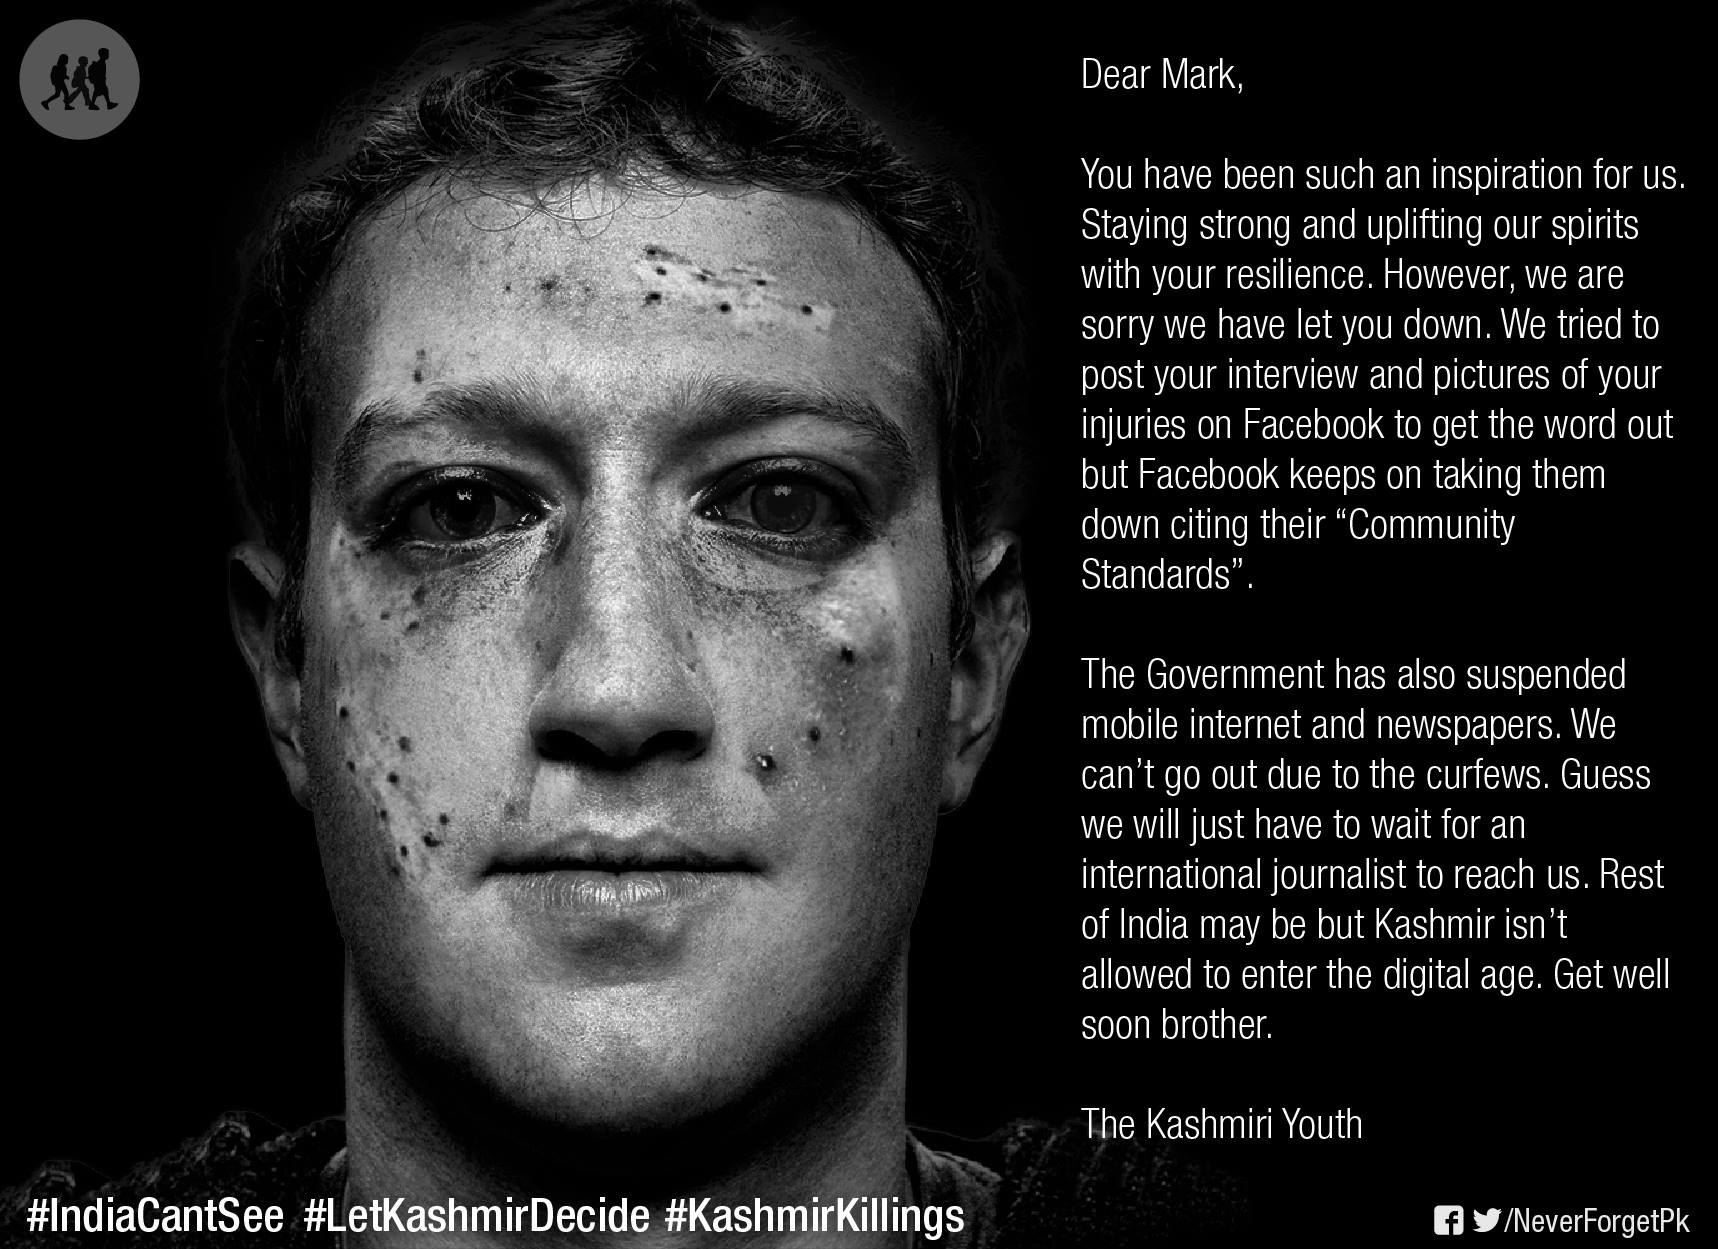 A black-and-white poster of Mark Zuckerberg, a Caucasian man with short hair, showing pellet wounds on his face. Next to his face is a letter that reads, 'Dear Mark, You have been such an inspiration for us. Staying strong and uplifting our spirits with your resilience. However, we are sorry we have let you down. We tried to post your interview and pictures of your injuries on Facebook to get the word out but Facebook keeps on talking them down citing their 'Community Standards'.'